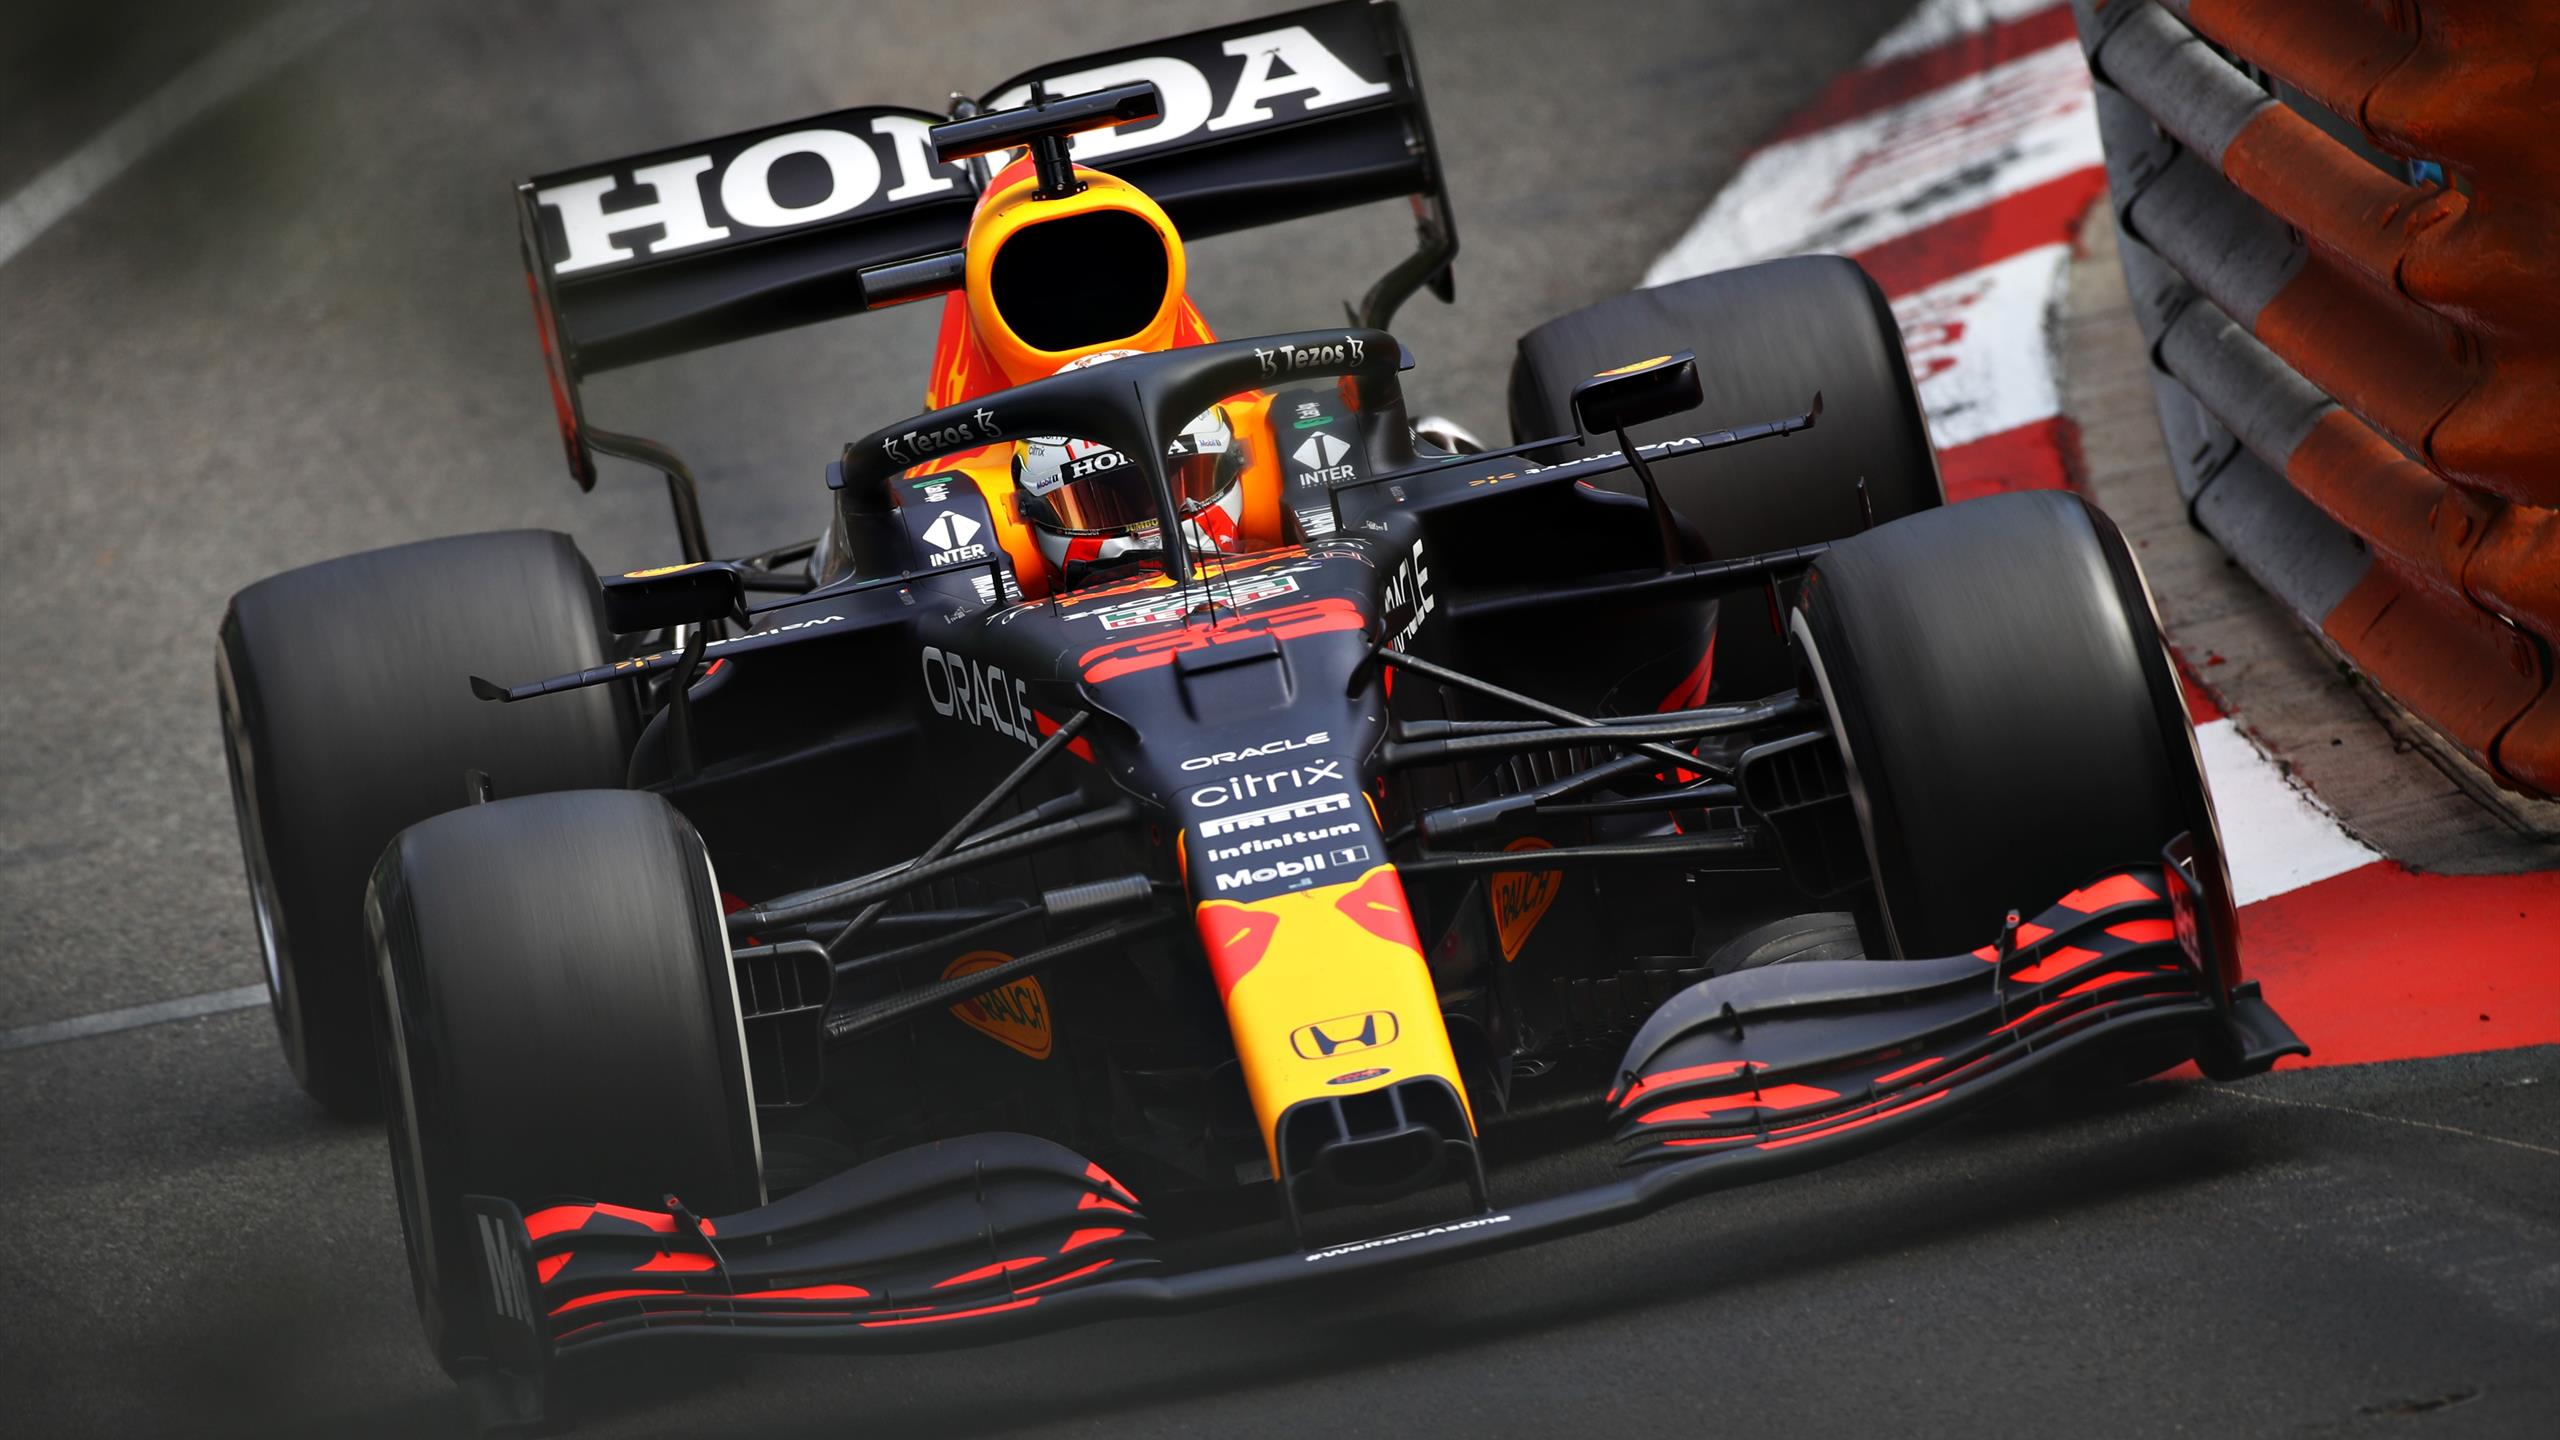 F1 Monaco Grand Prix 2021 Bull's Max Verstappen storms to victory to take championship lead from Lewis Hamilton